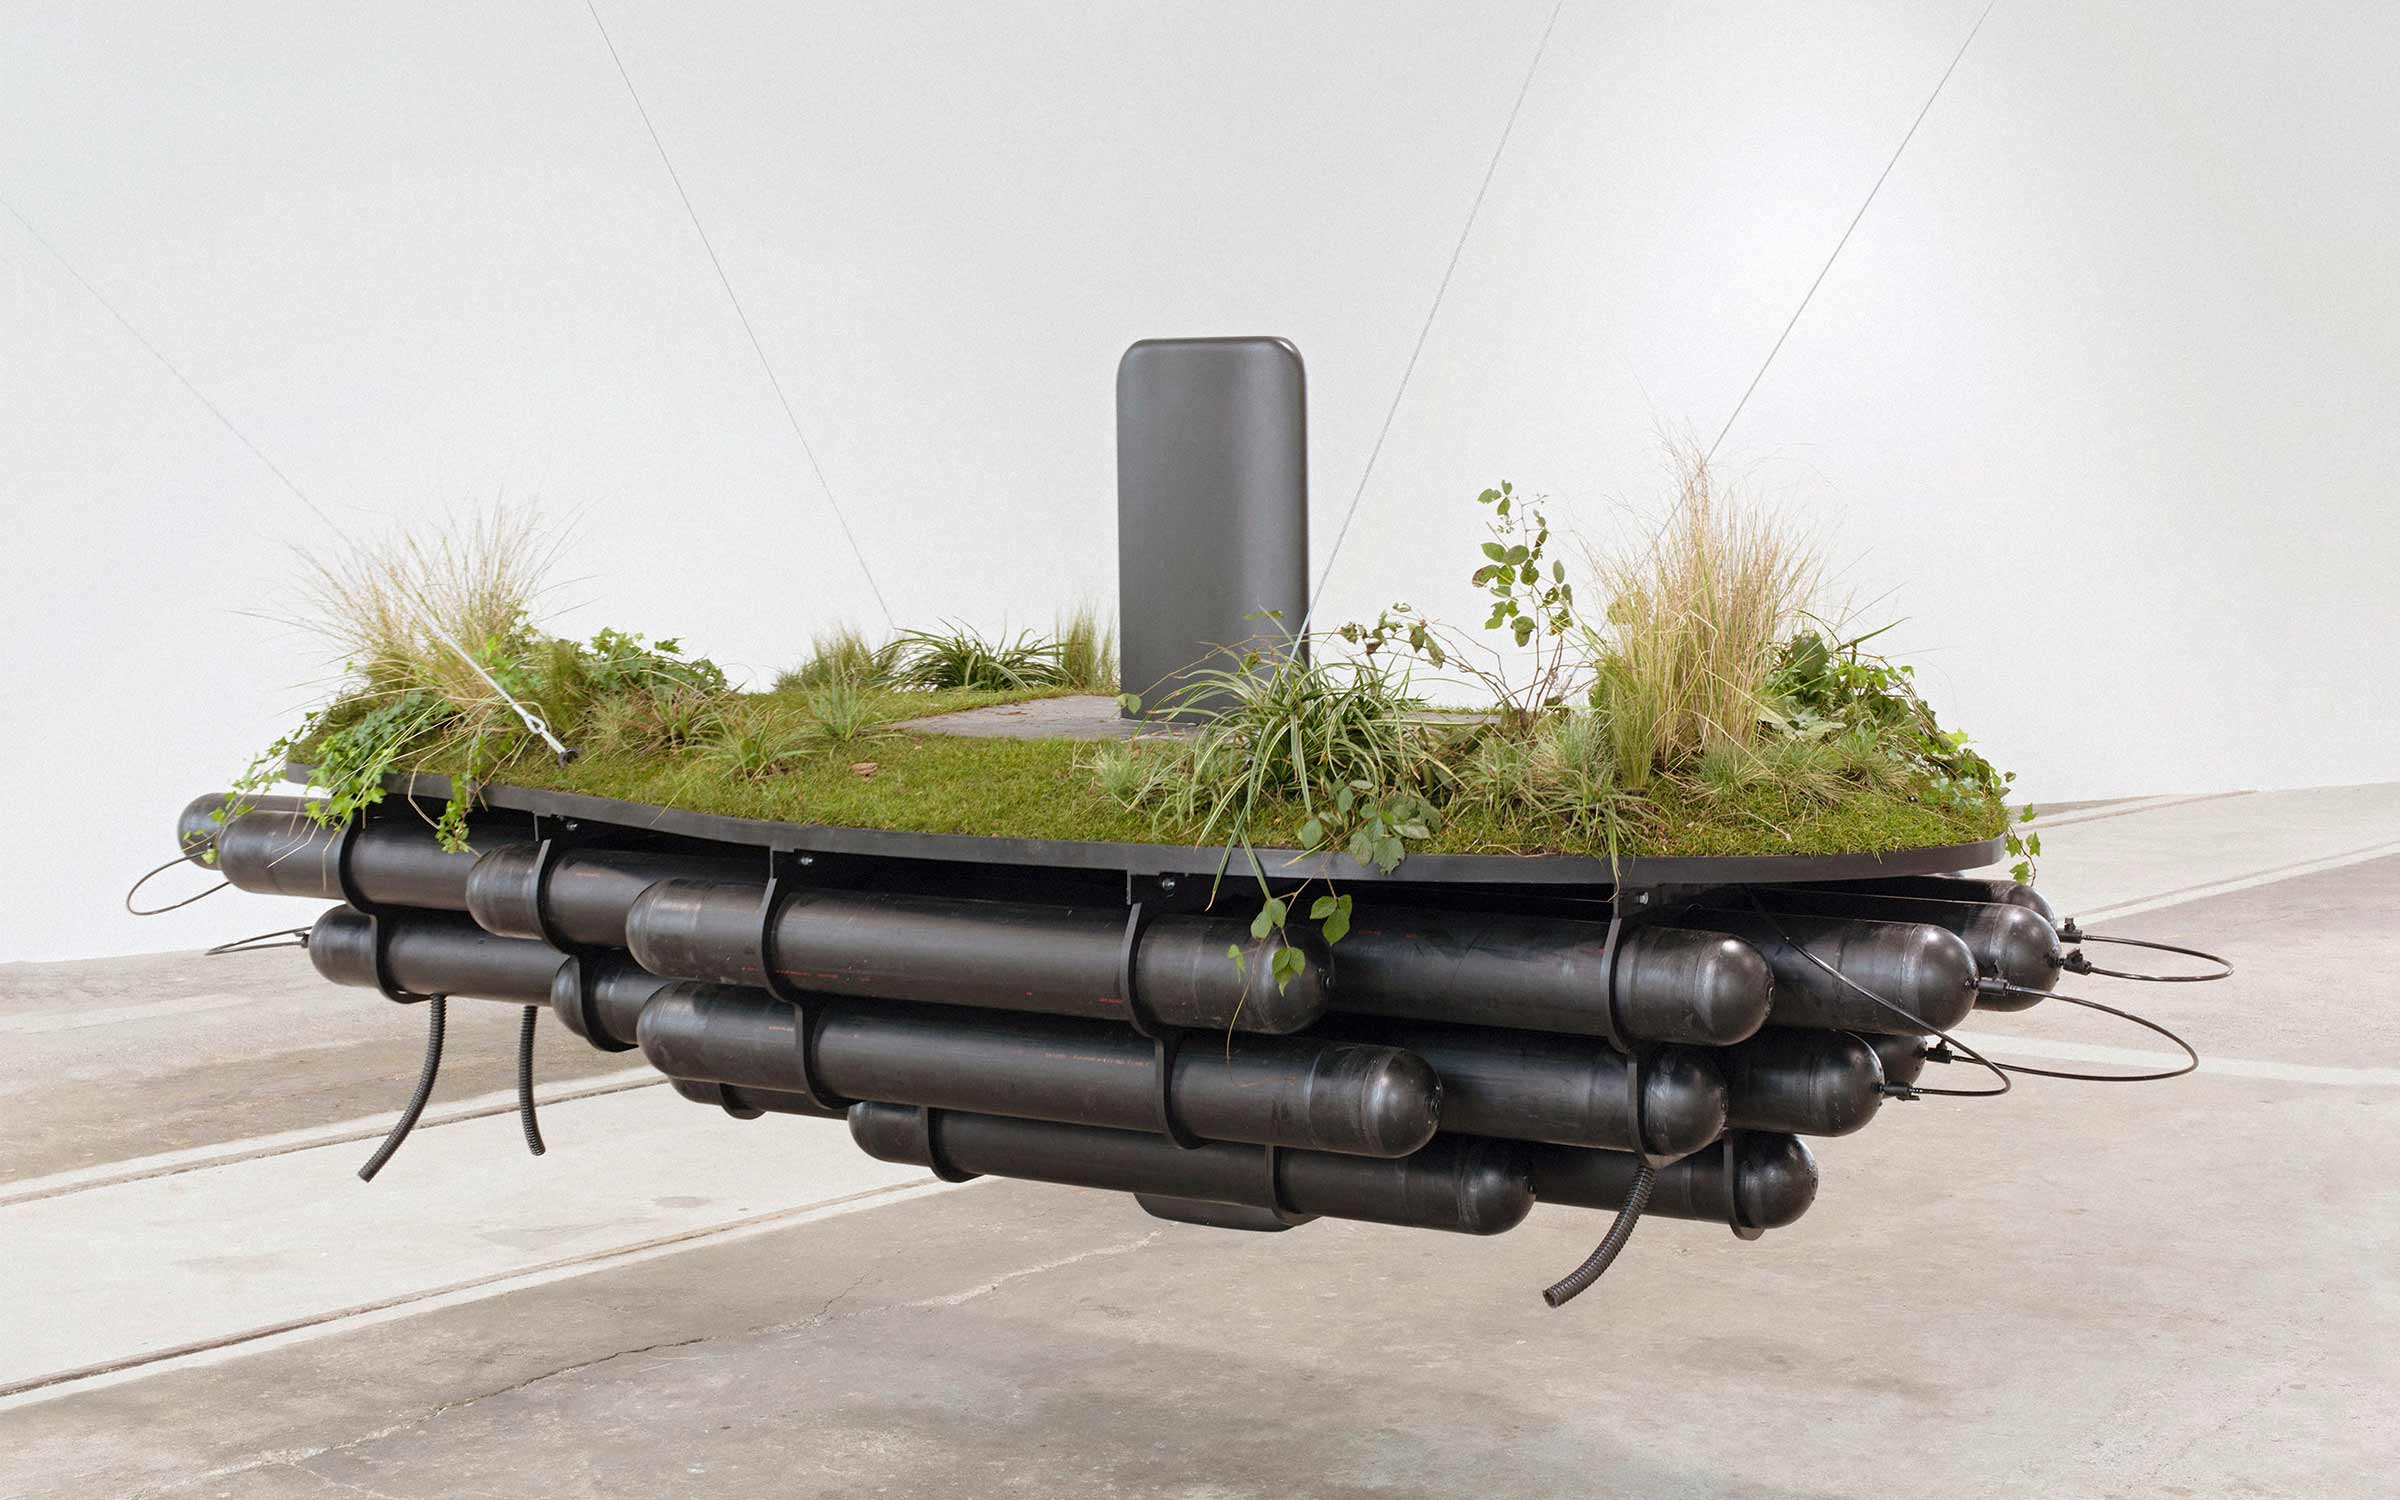 Simon Starling, Project for a Floating Garden (After Little Sparta), 2011/2015. Courtesy of the artist and neugerriemschneider, Berlin.